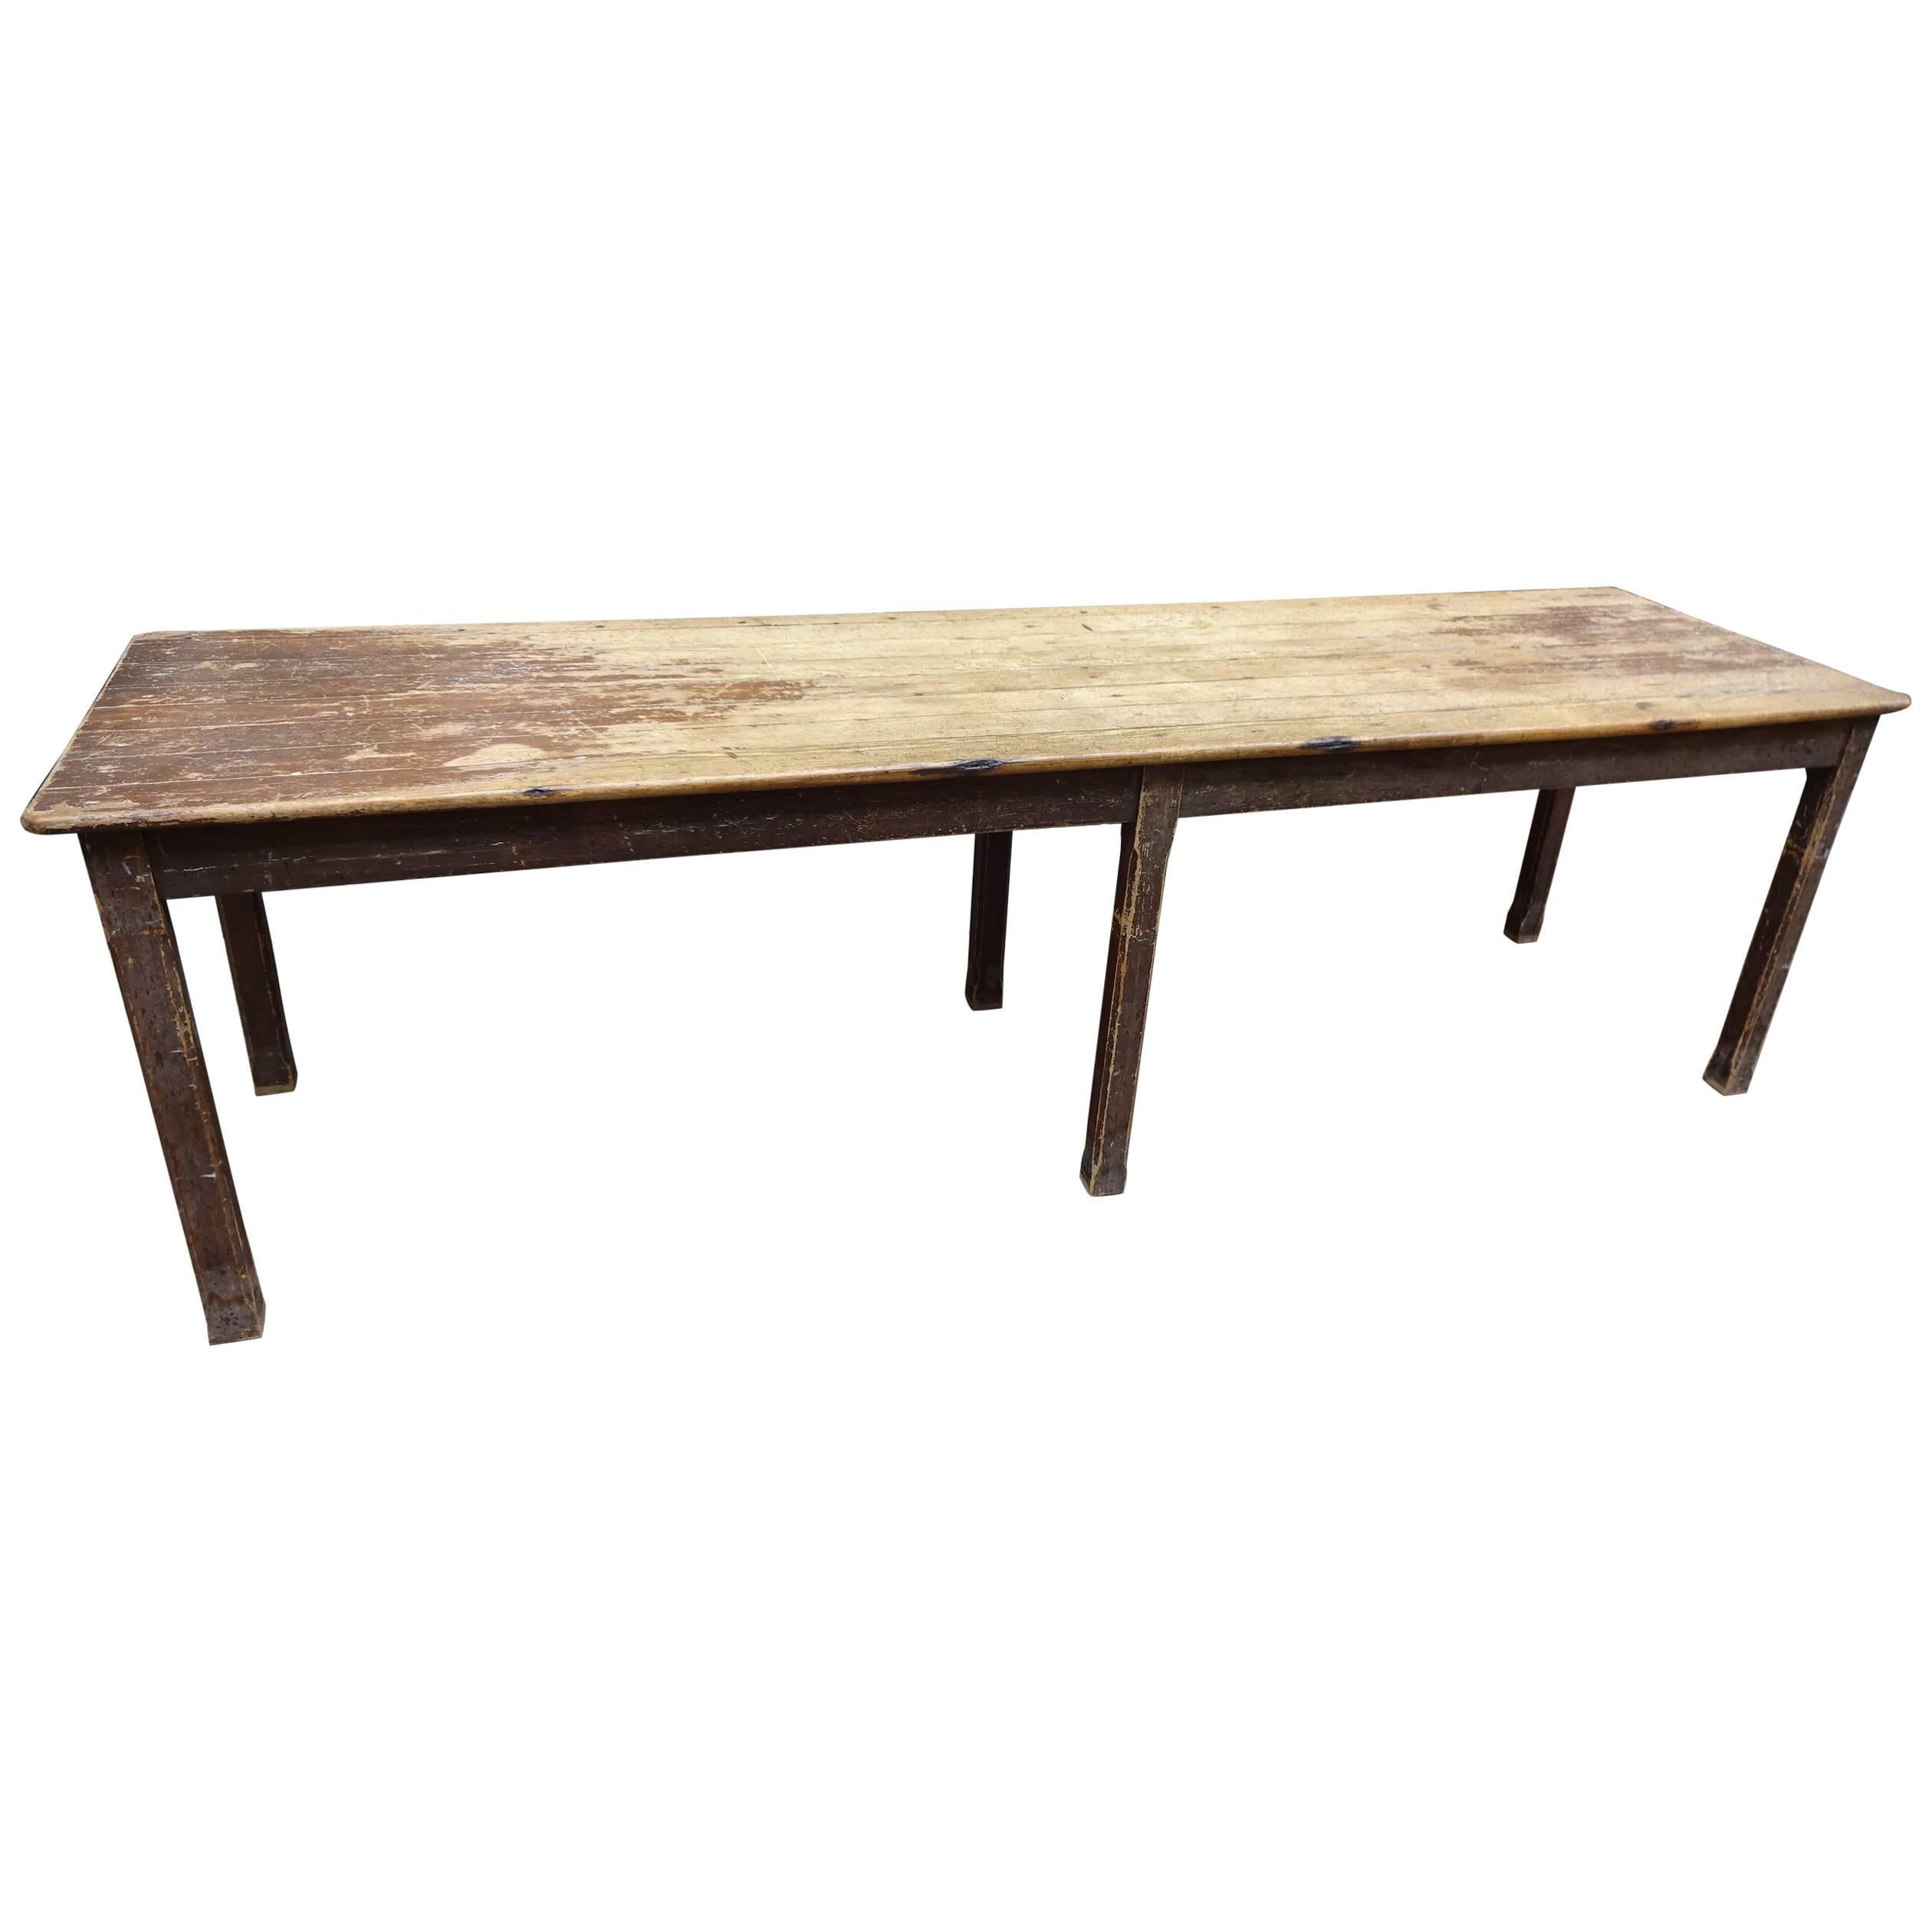 Late 19th Century French Refectory Table